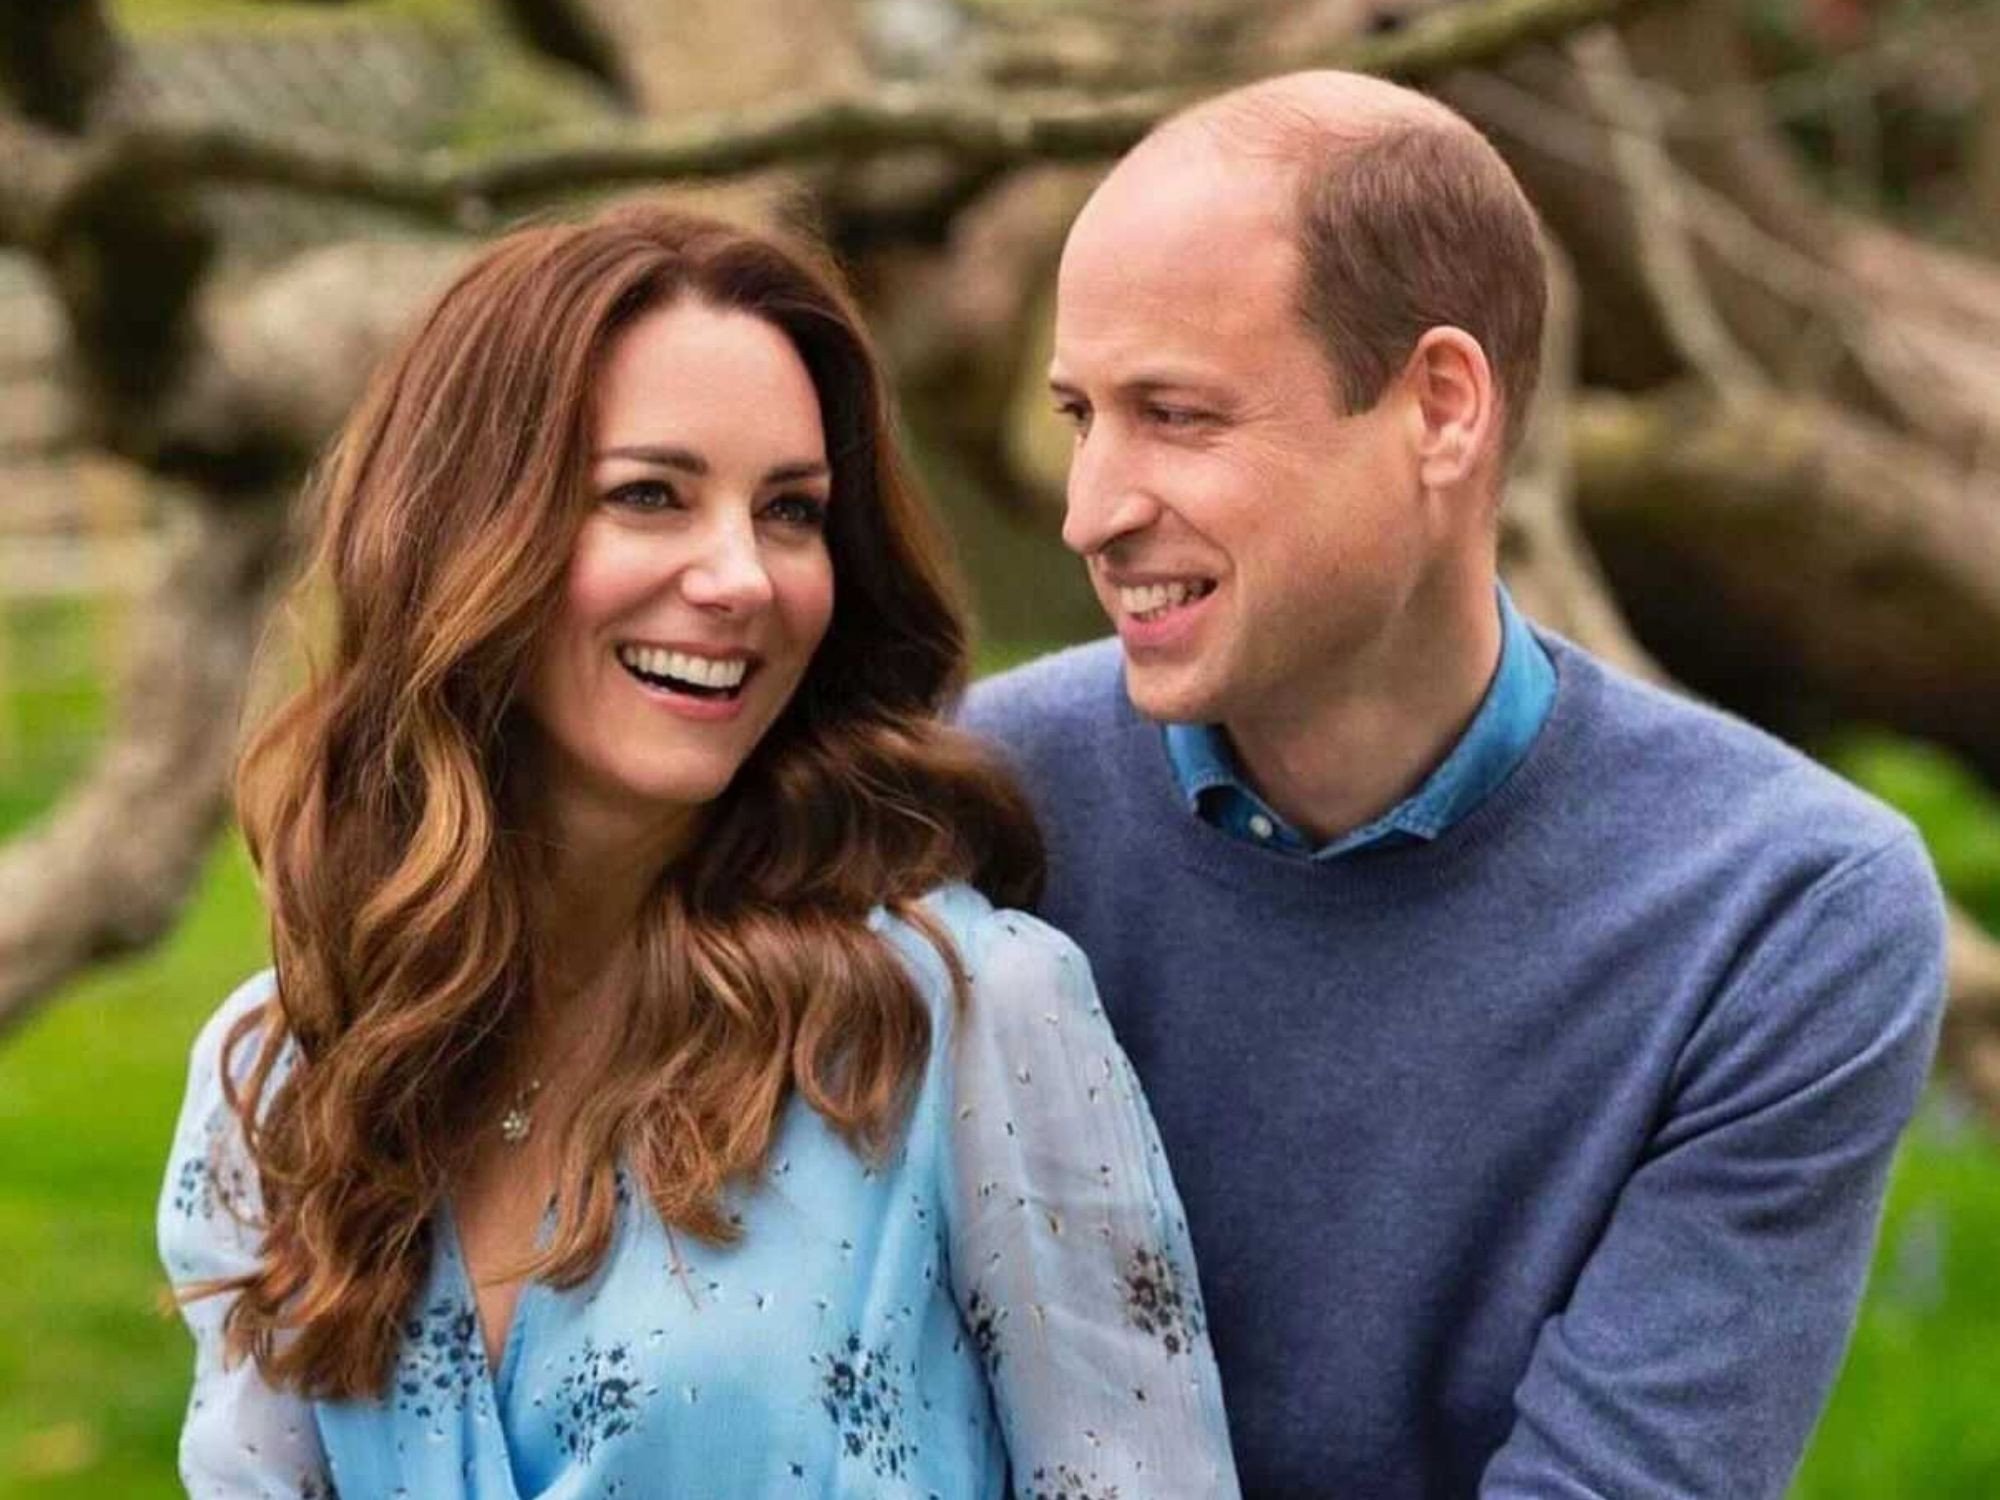 prince william and his wife kate are among the most popular royals 10 years after their marriage photo file